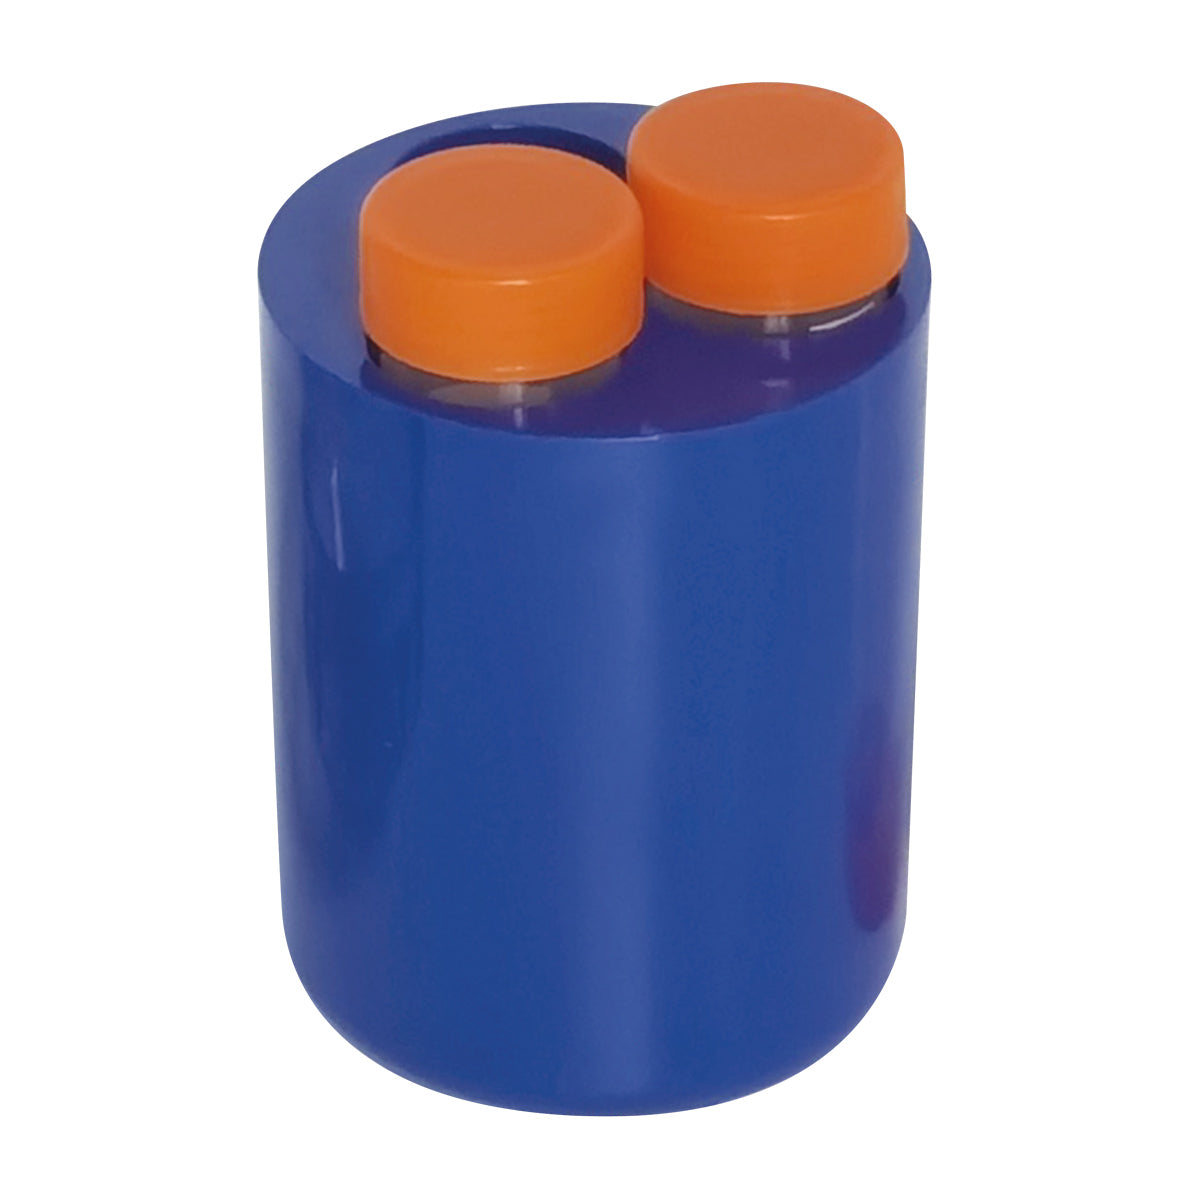 Adapter for 3 x 50ml  tubes suitable for 500ml aerosol buckets